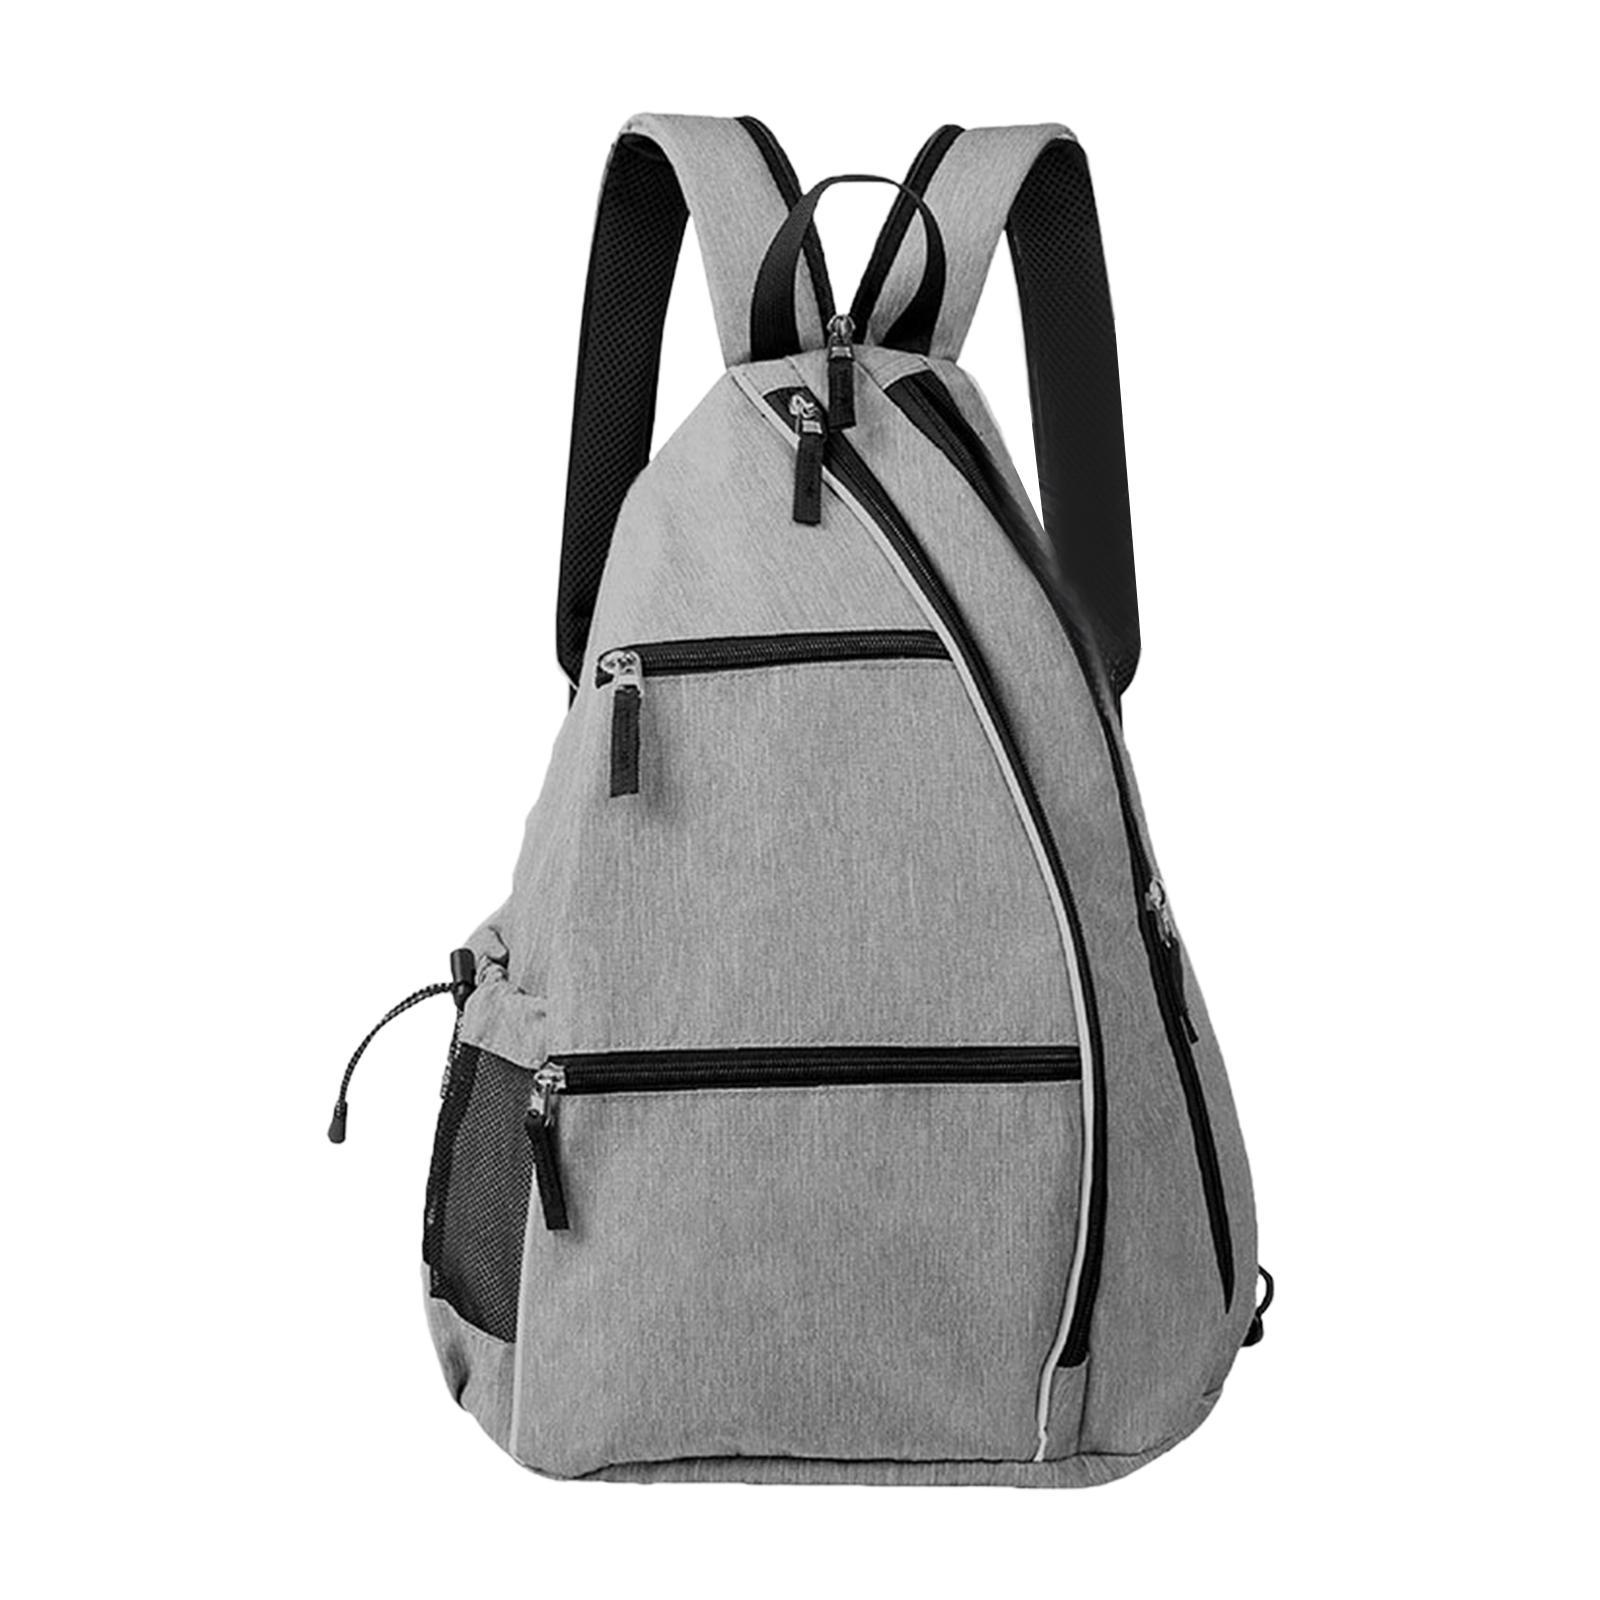 Top more than 156 tennis bag backpack latest